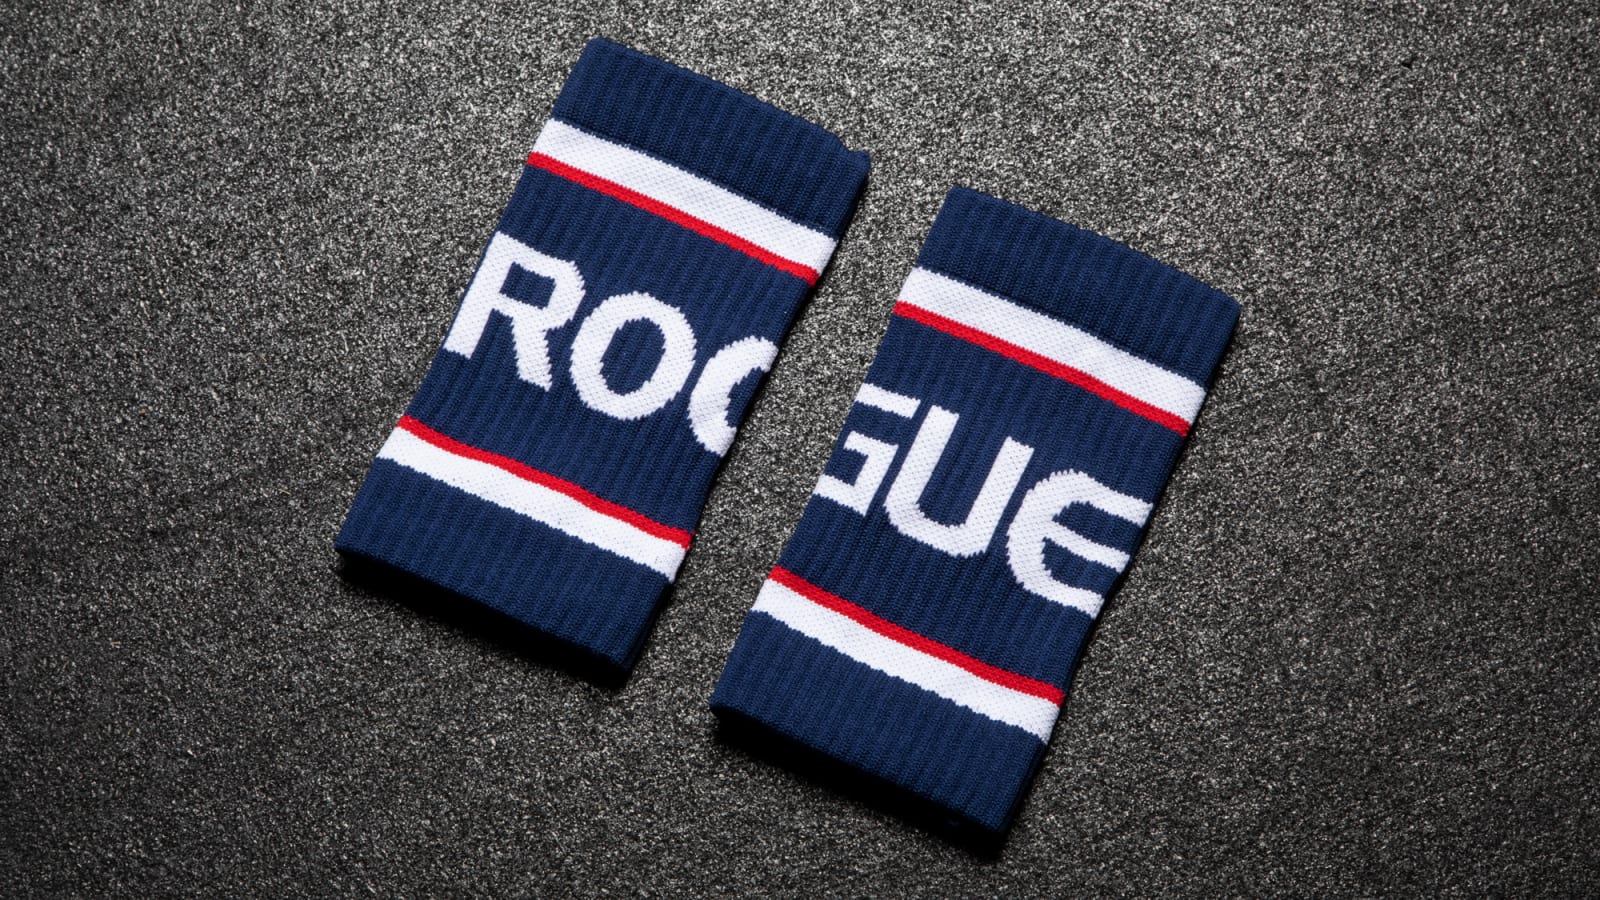 Rogue Gym Towel - Navy / White